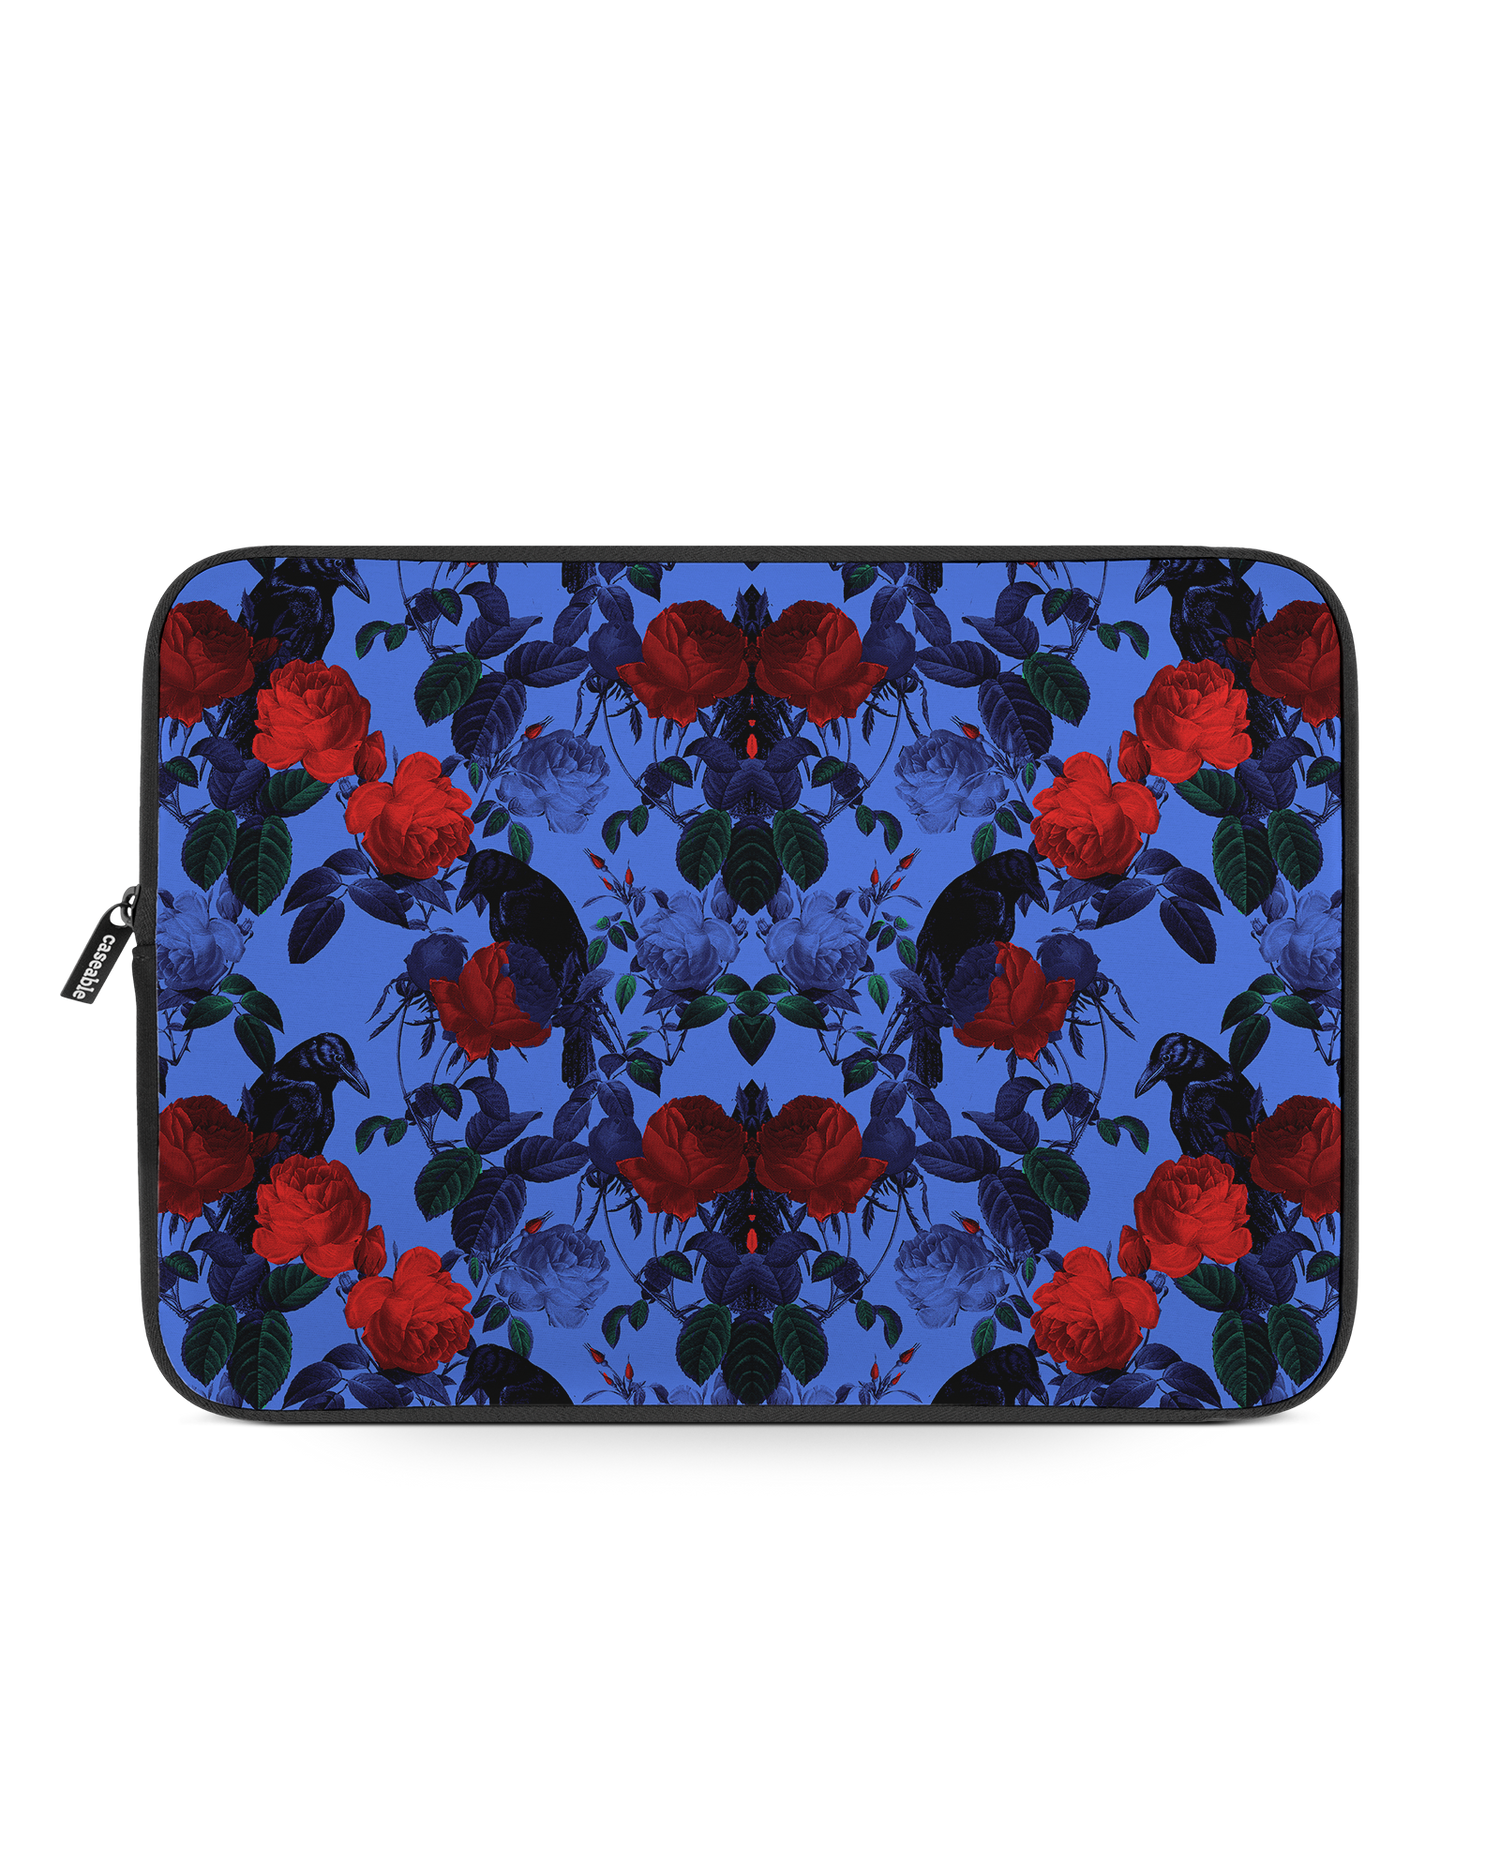 Roses And Ravens Laptop Case 13-14 inch: Front View